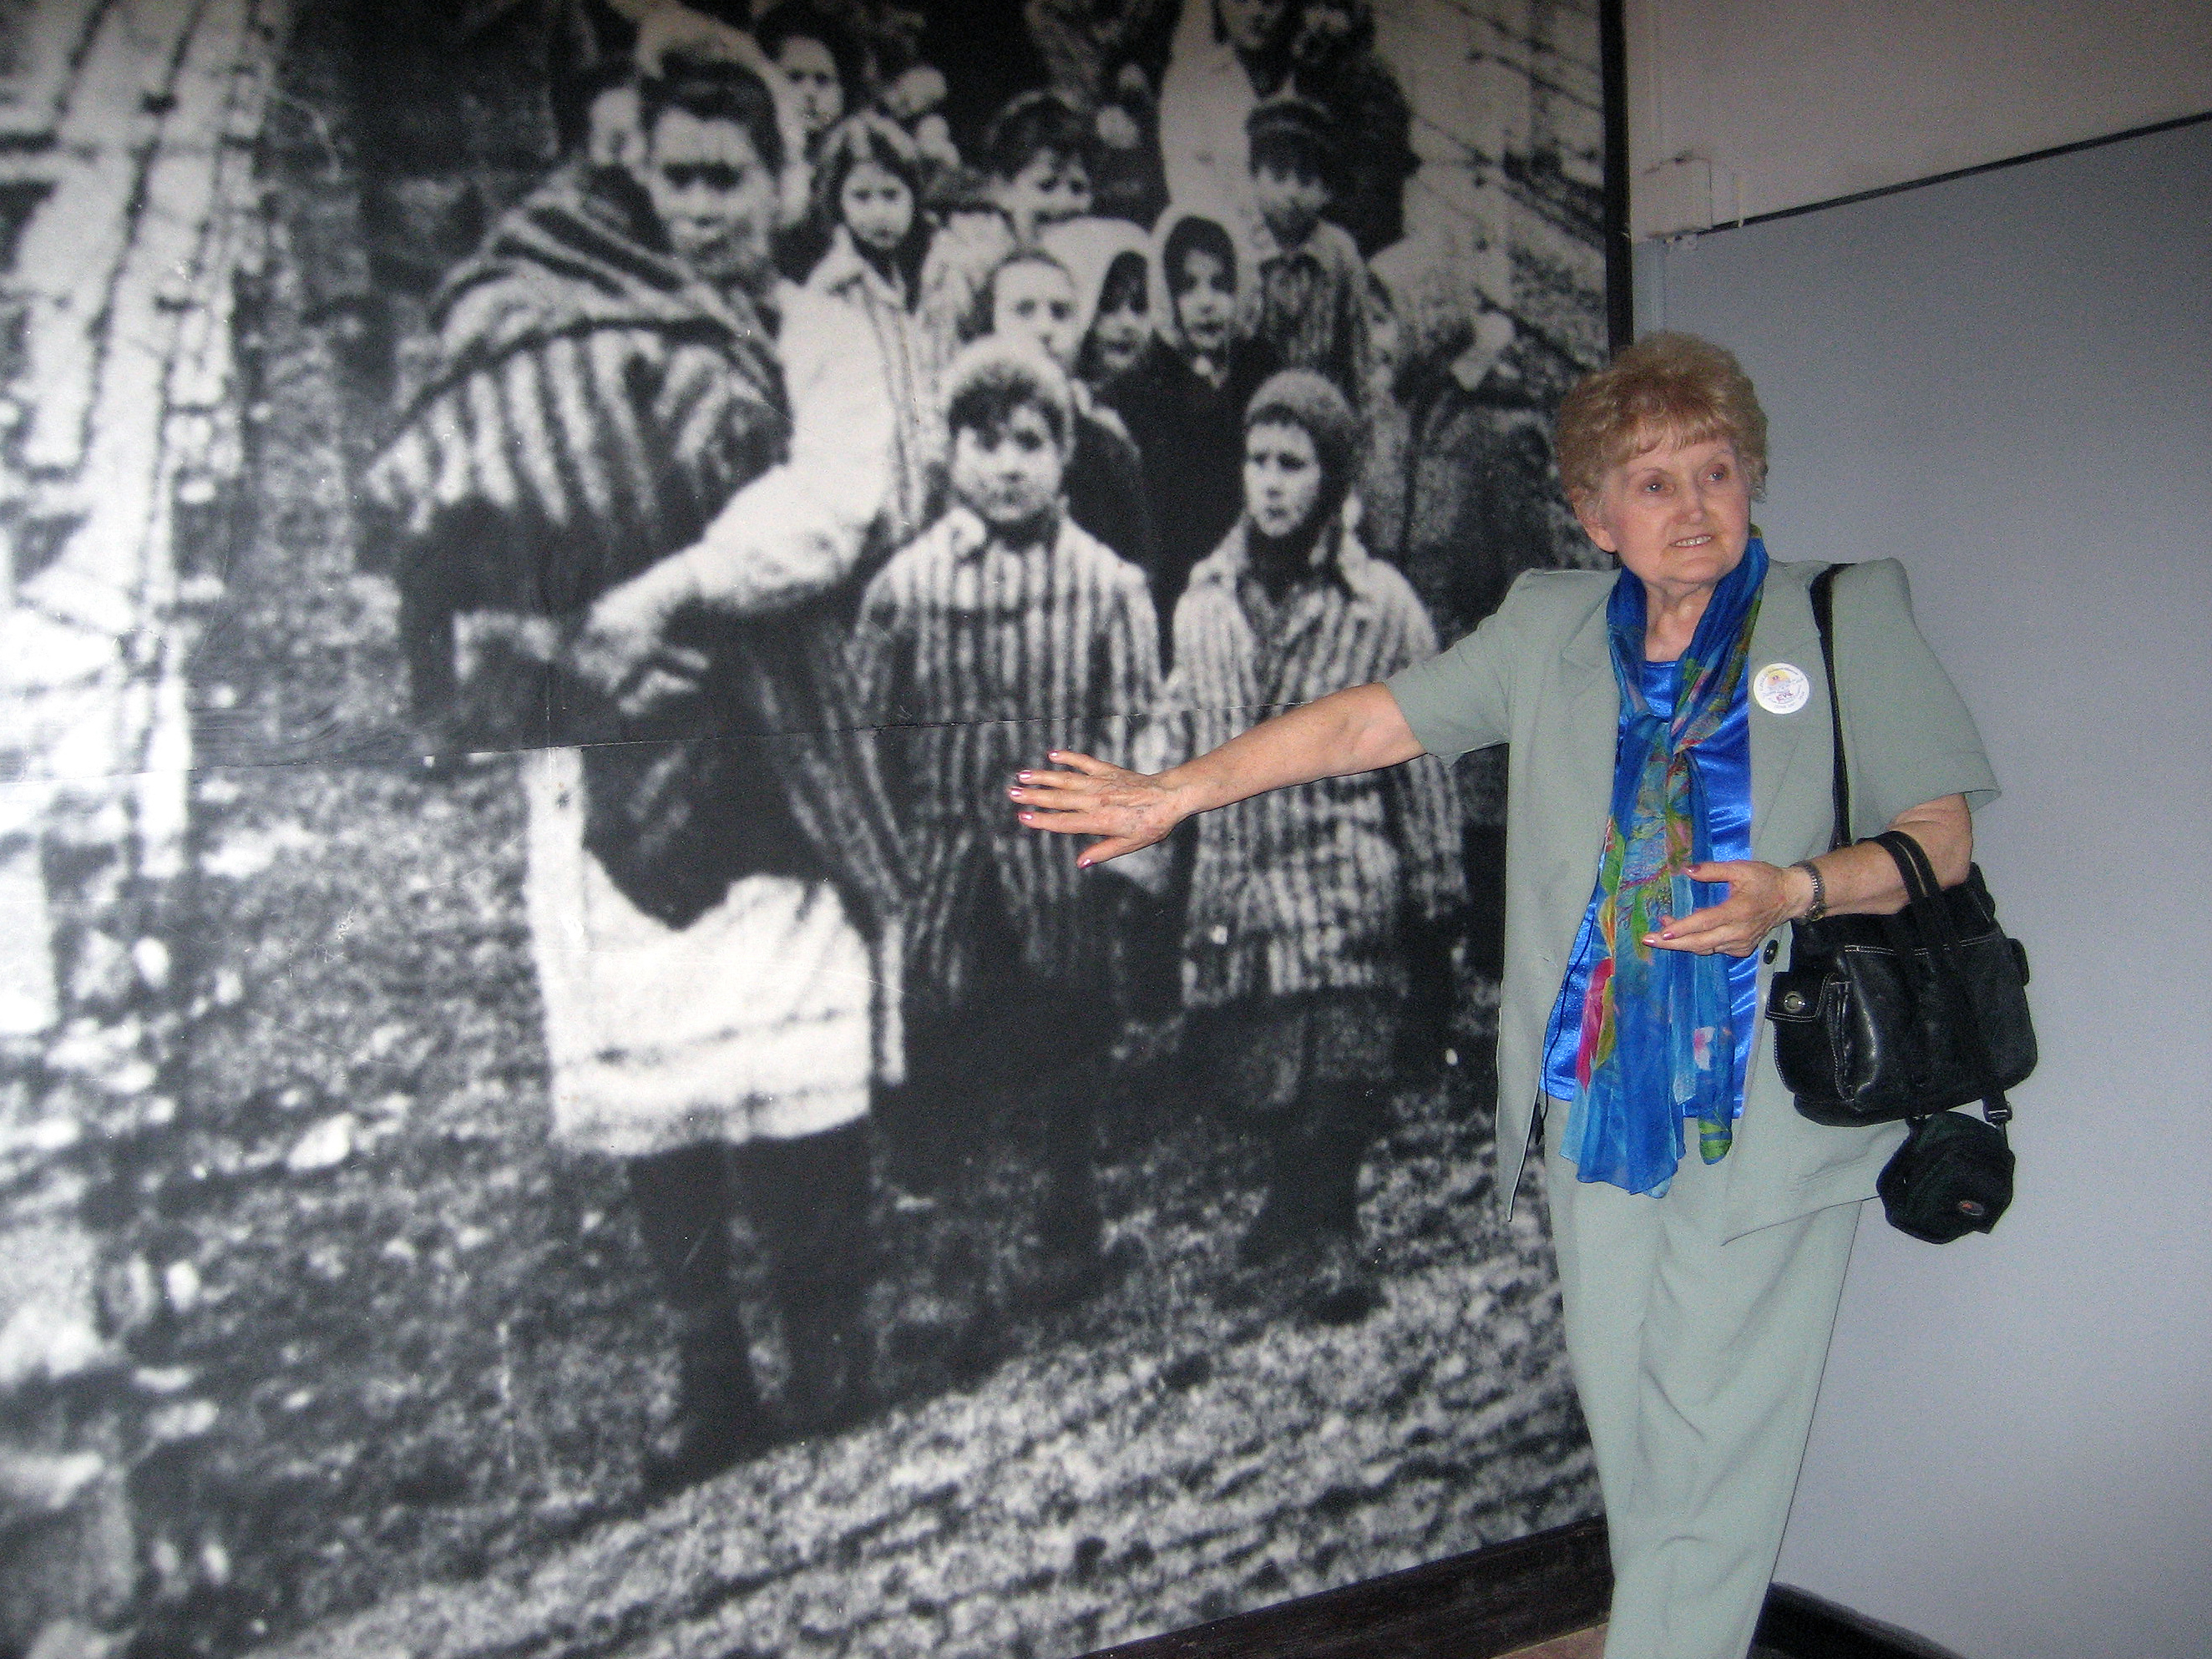 Eva Kor points to an image of herself on the wall of the Auschwitz-Birkenau State Museum in Poland. Courtesy of the CANDLES Holocaust Museum and Education Center